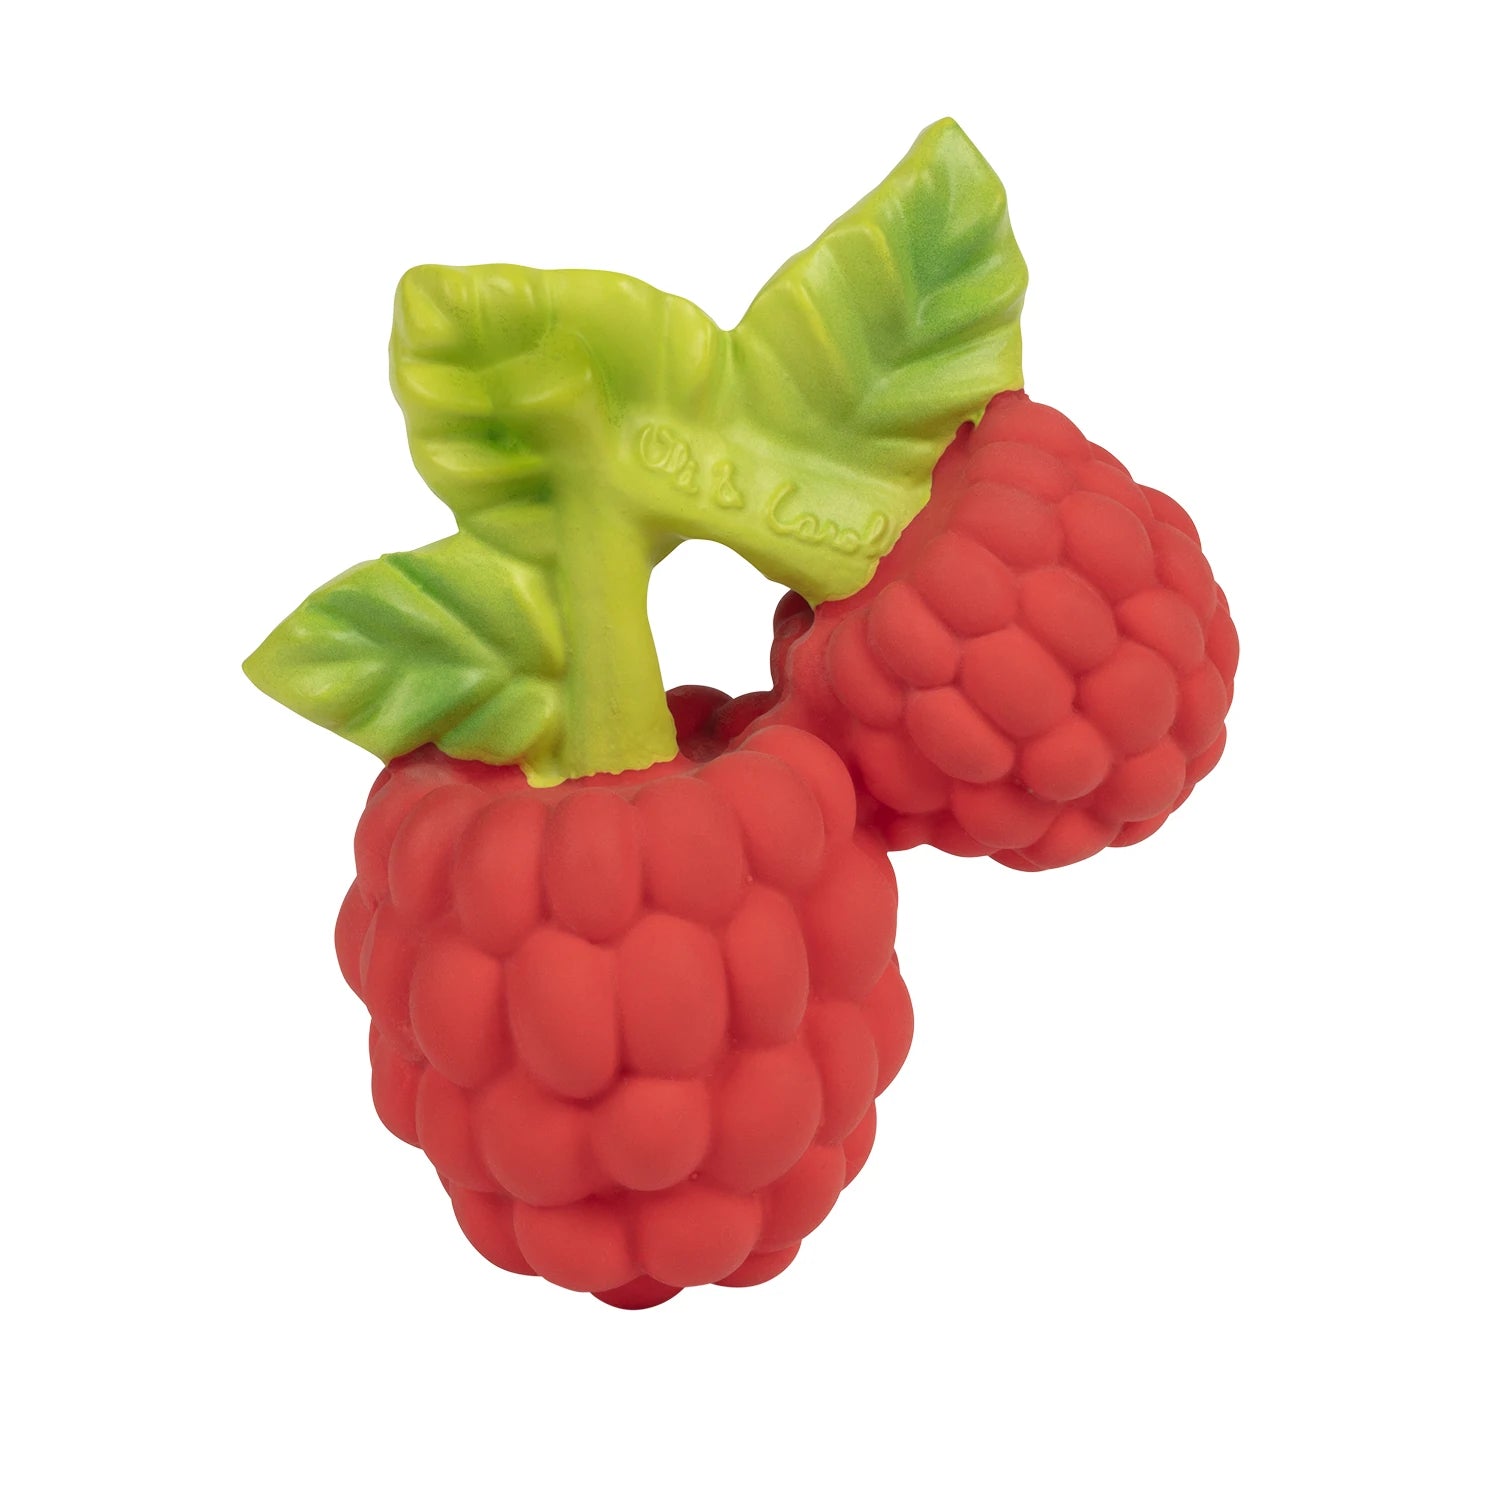 Valery the Raspberry Rubber Teether